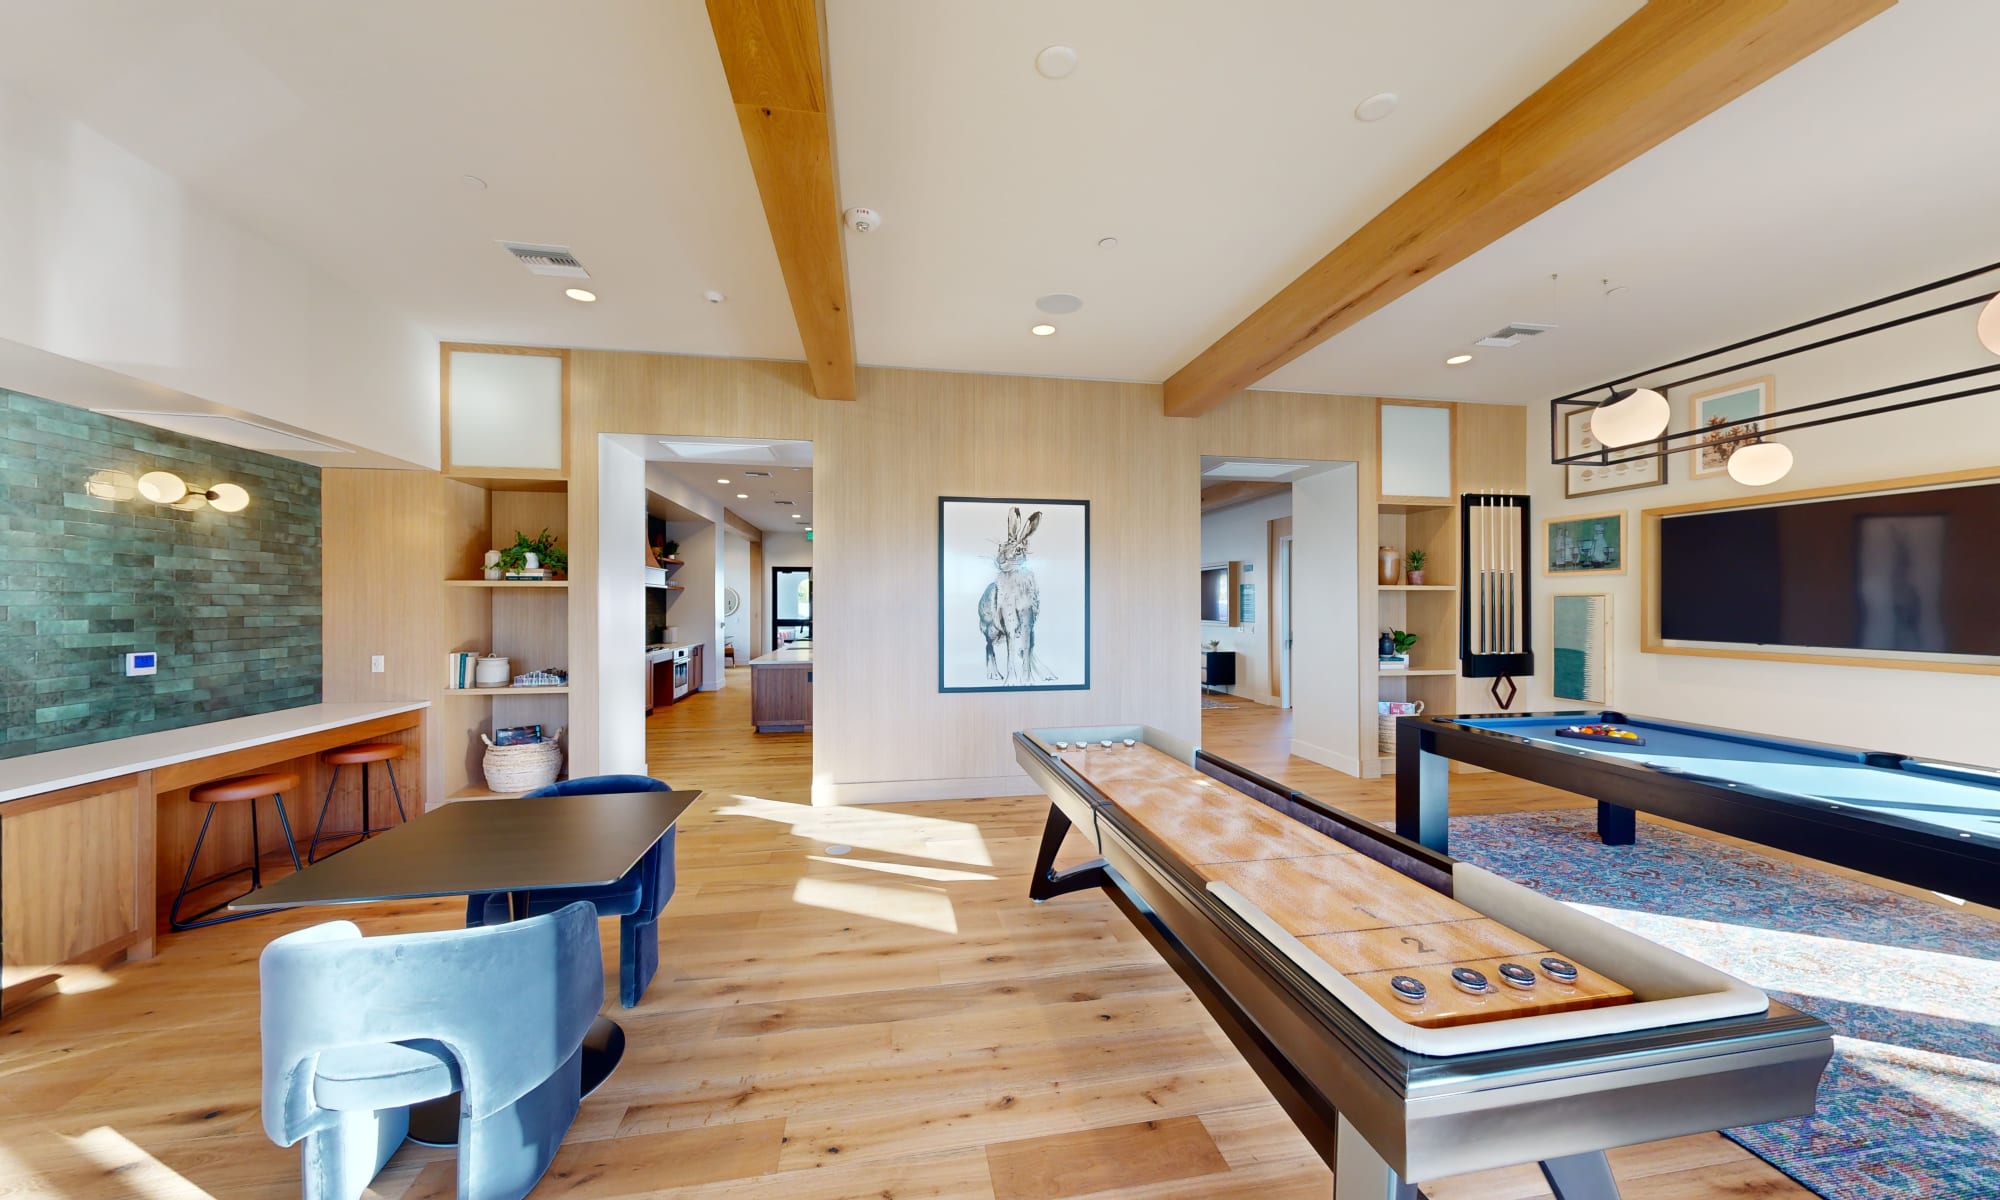 Shuffle board and pool table in the resident lounge at The Villas at Anacapa Canyon in Camarillo, California